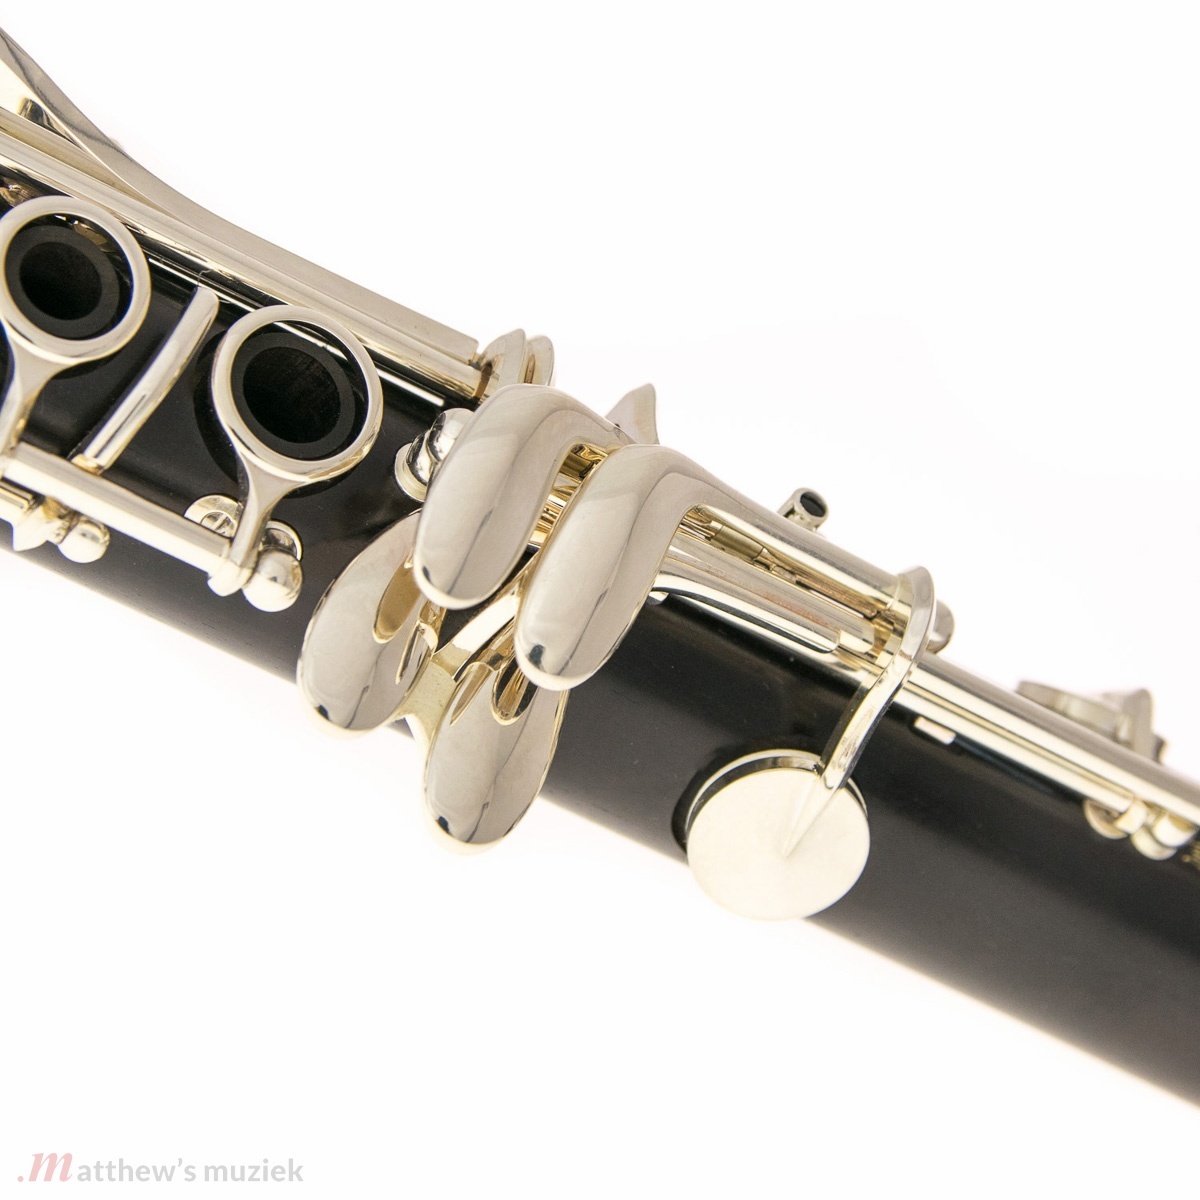 Buffet Crampon Bb Clarinet - E13 with hard case